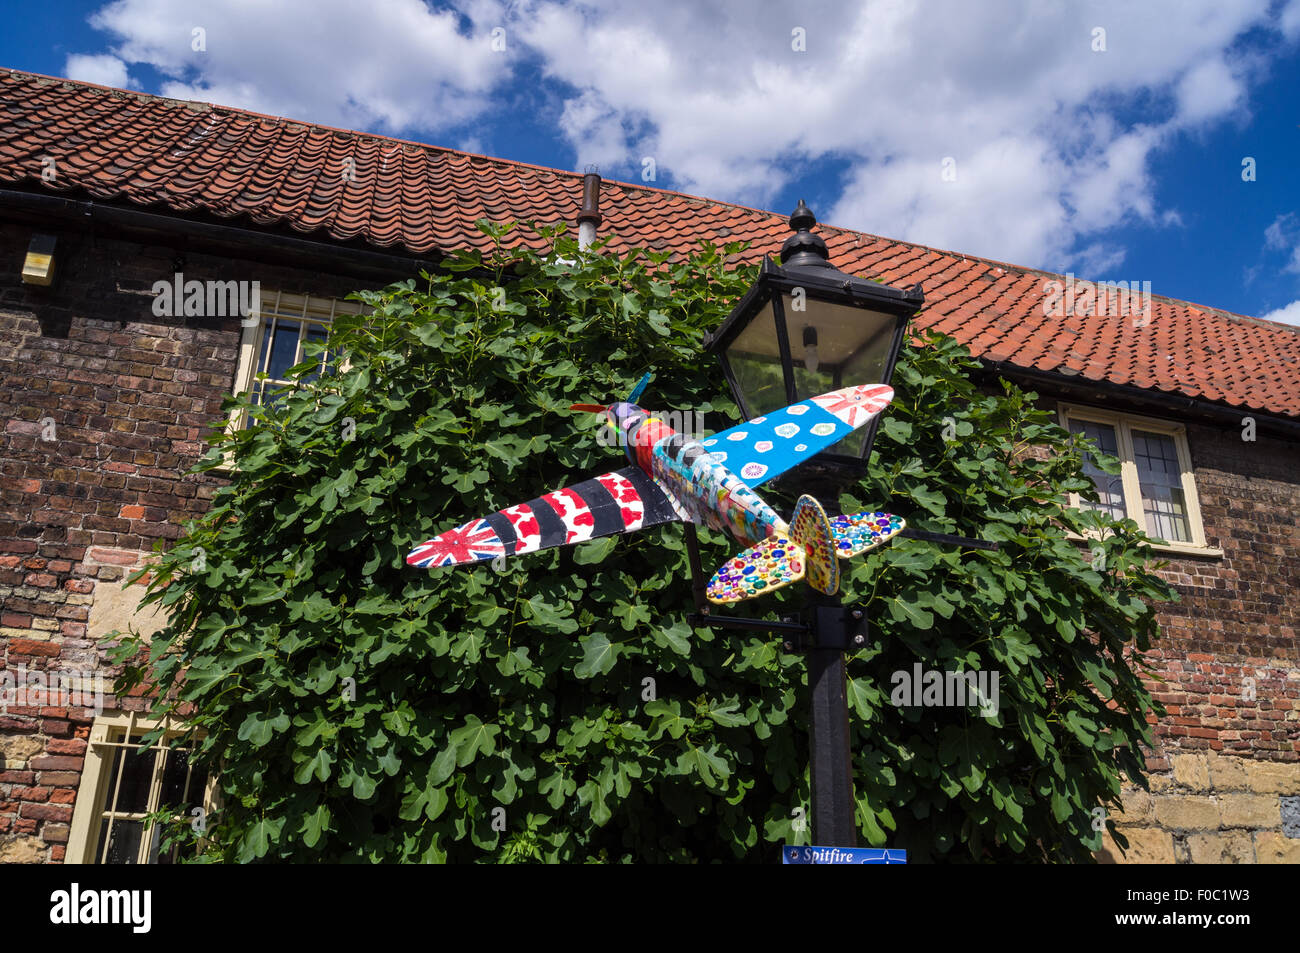 Decorated model of  Spitfire fighter aircraft on 'Spitfire Trail' commemorating Battle of Britain, King's Lynn  Norfolk, England Stock Photo